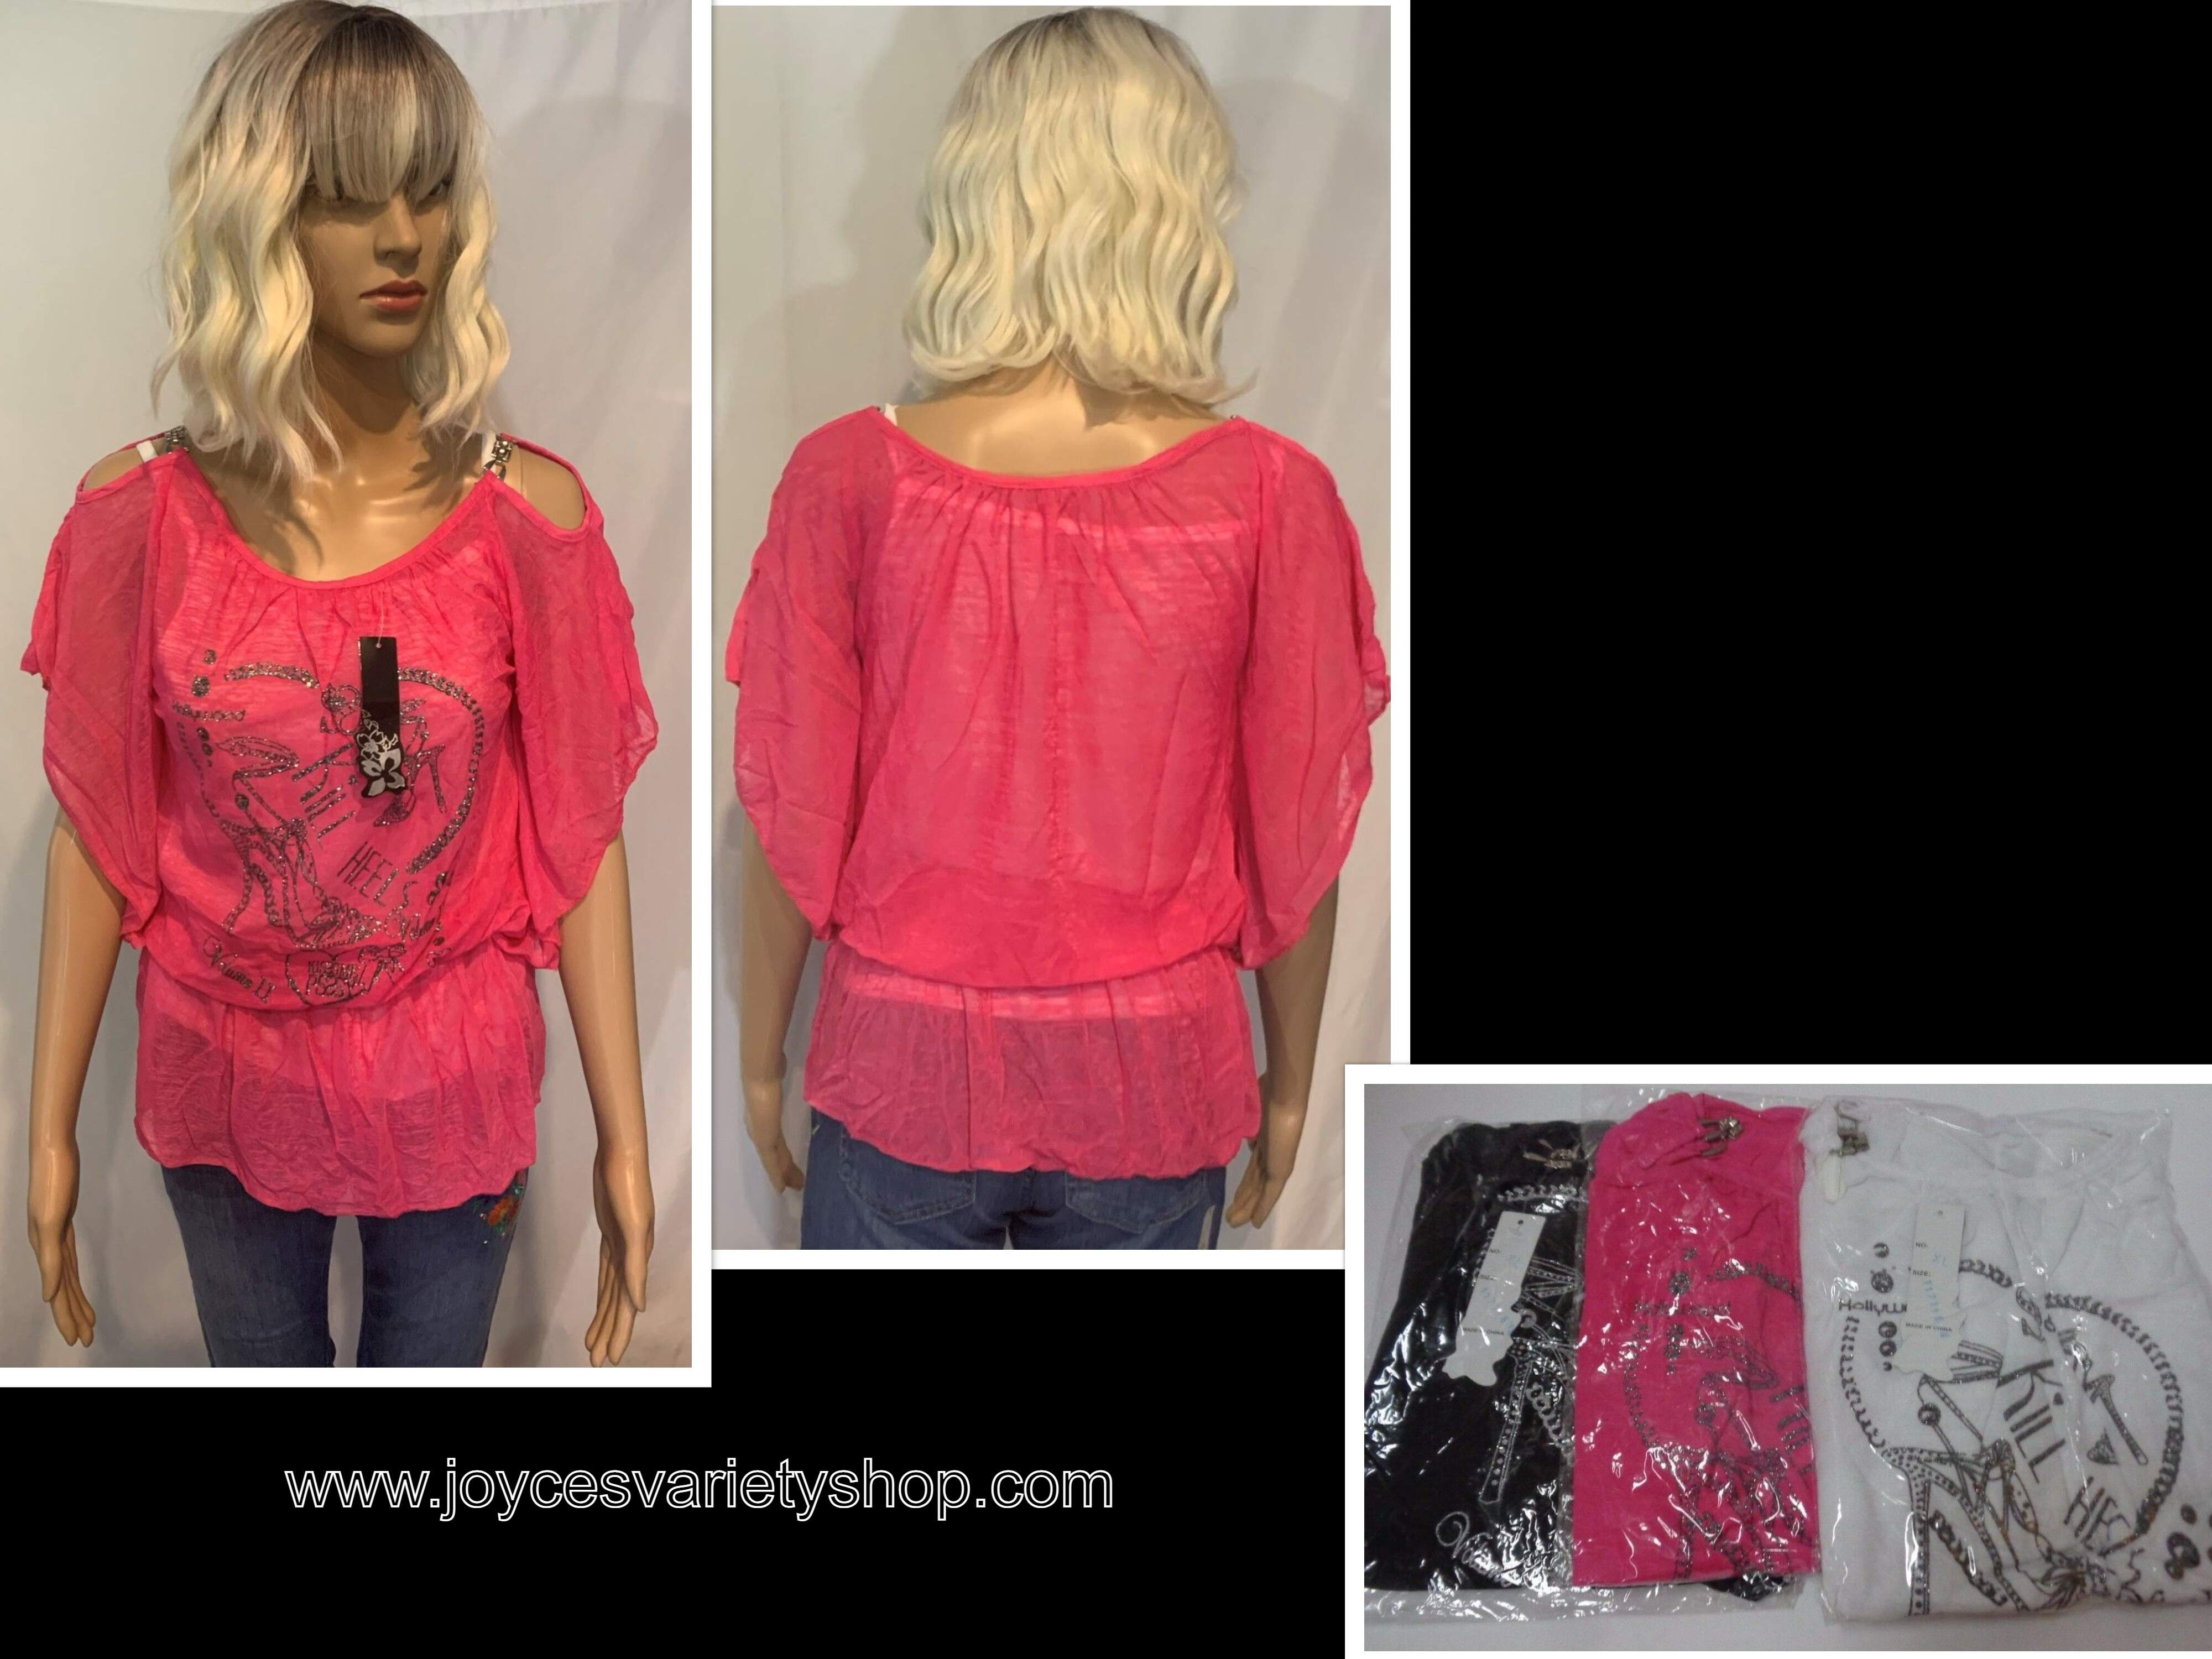 Uptown Girl Fashion Heels Sheer Top Blouse 2 Piece Tank Many Colors Sizes